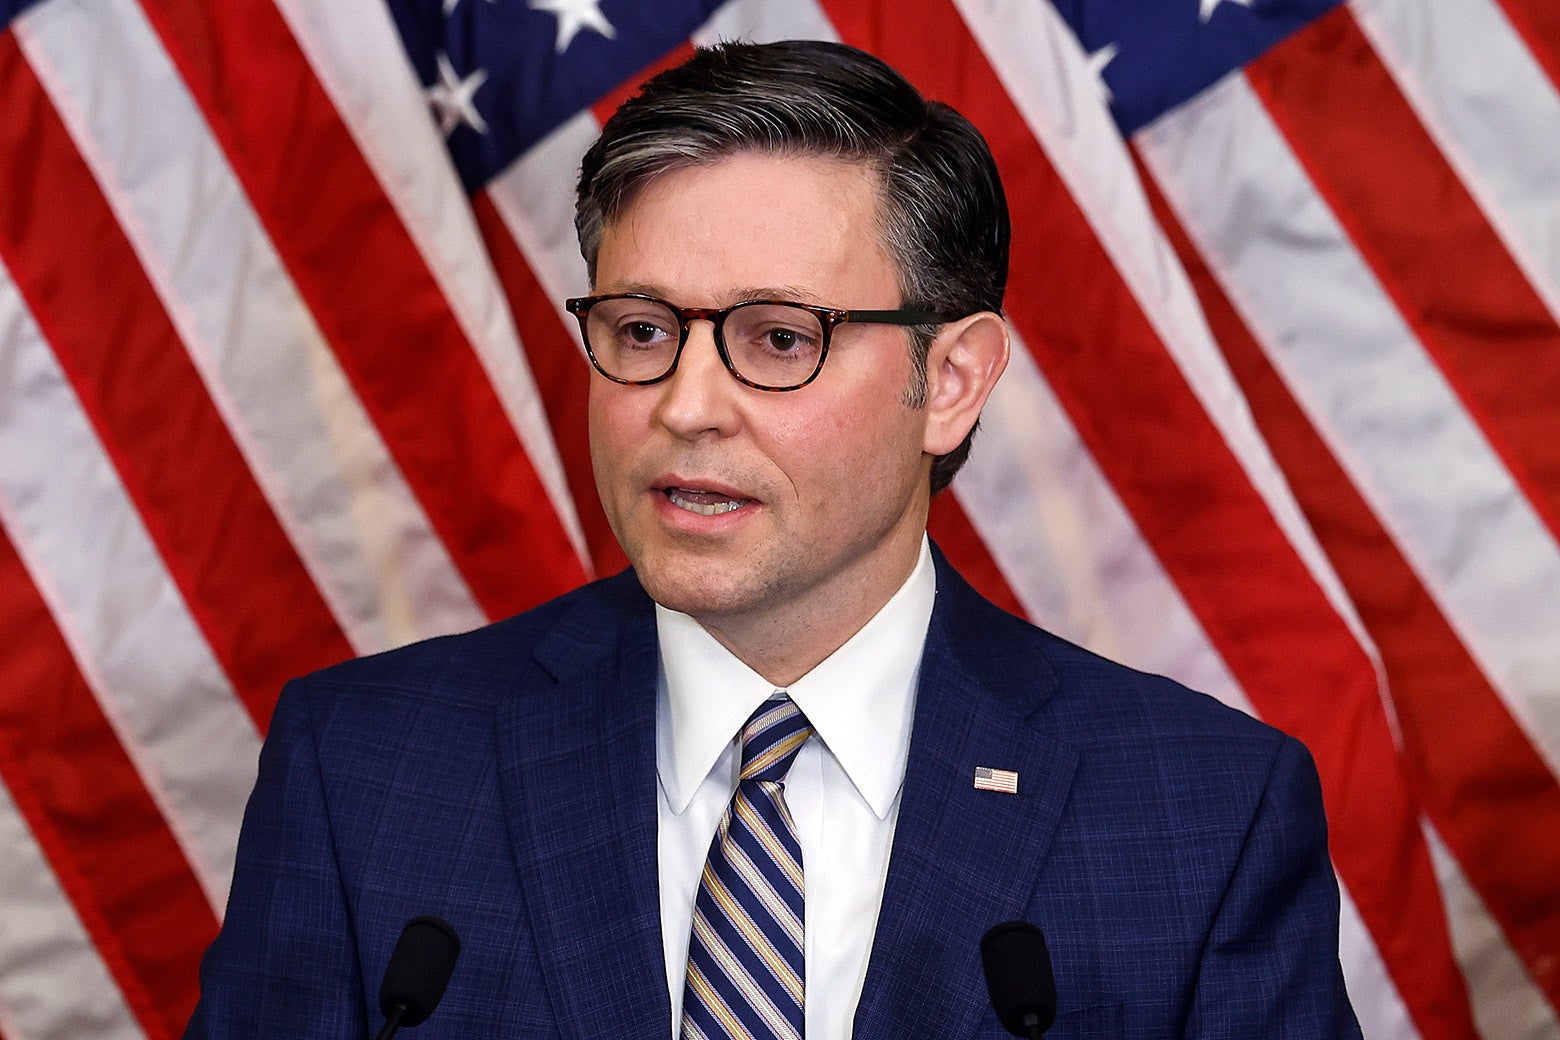 Speaker of the House Mike Johnson appears in front of an American flag. He is wearing Clark Kent–style glasses, and his mouth is slightly agape.